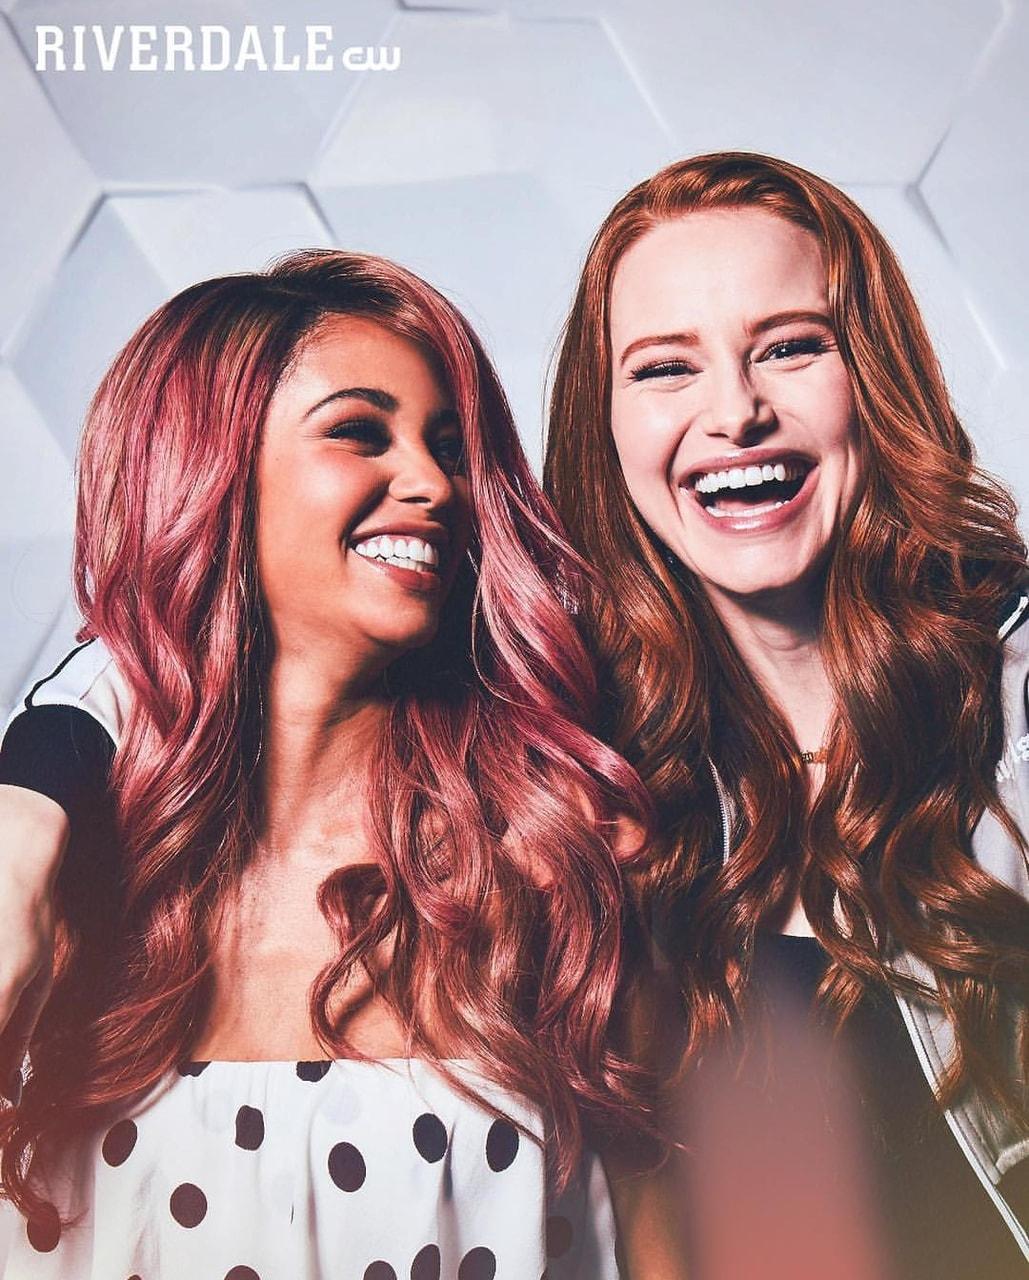 image about Choni❤. See more about riverdale